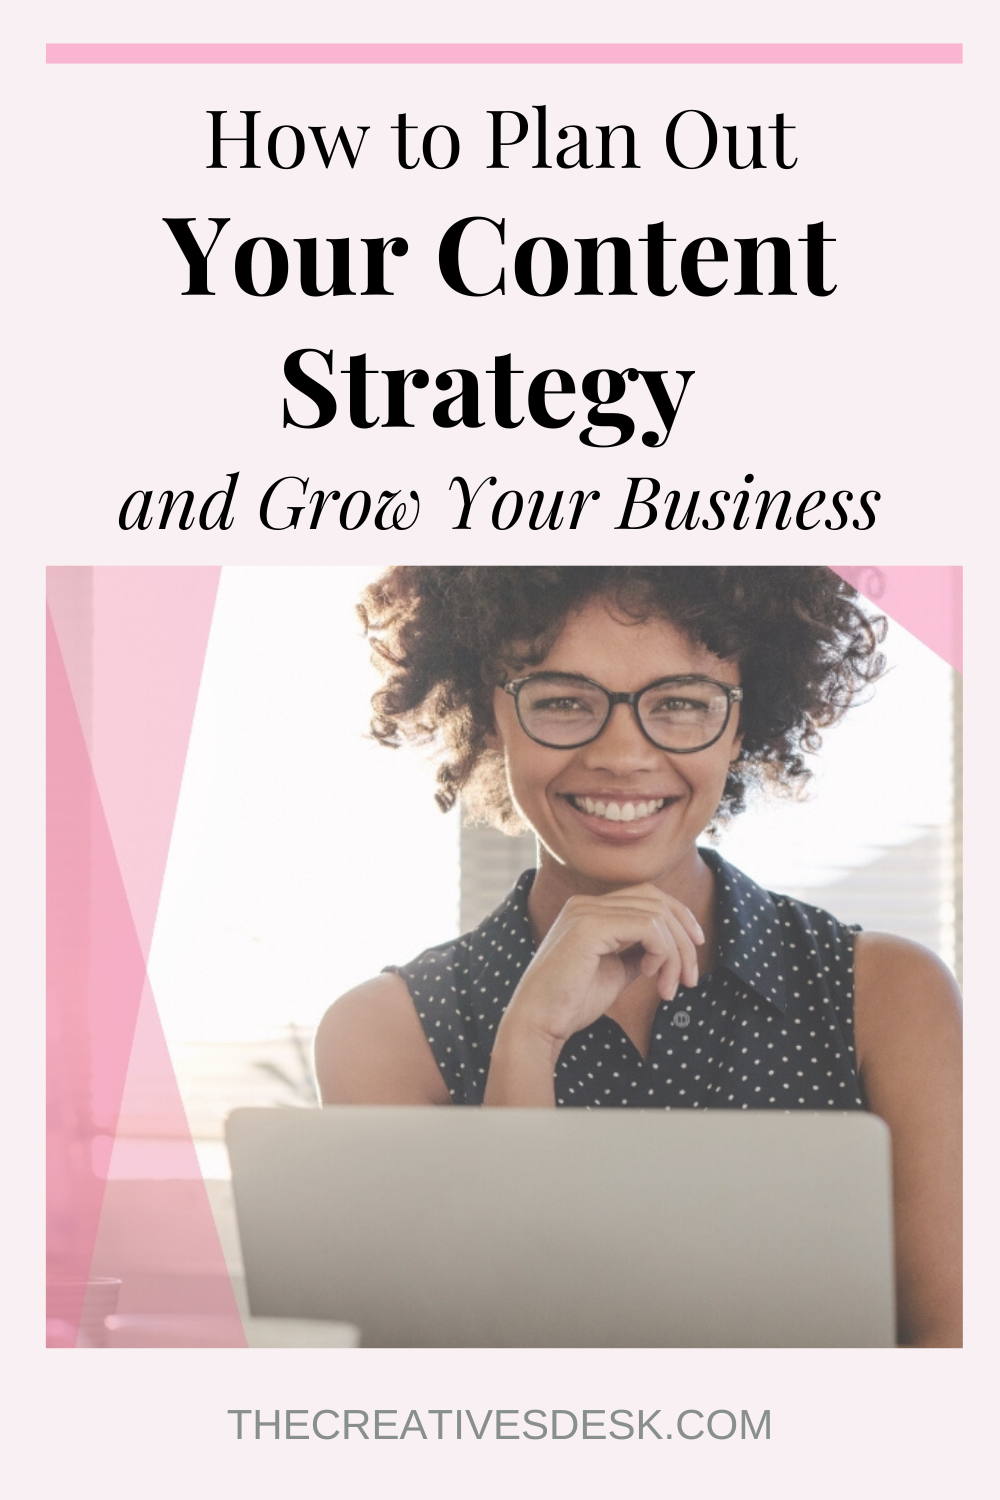 How to Plan Out Your Content Strategy and Grow Your Business